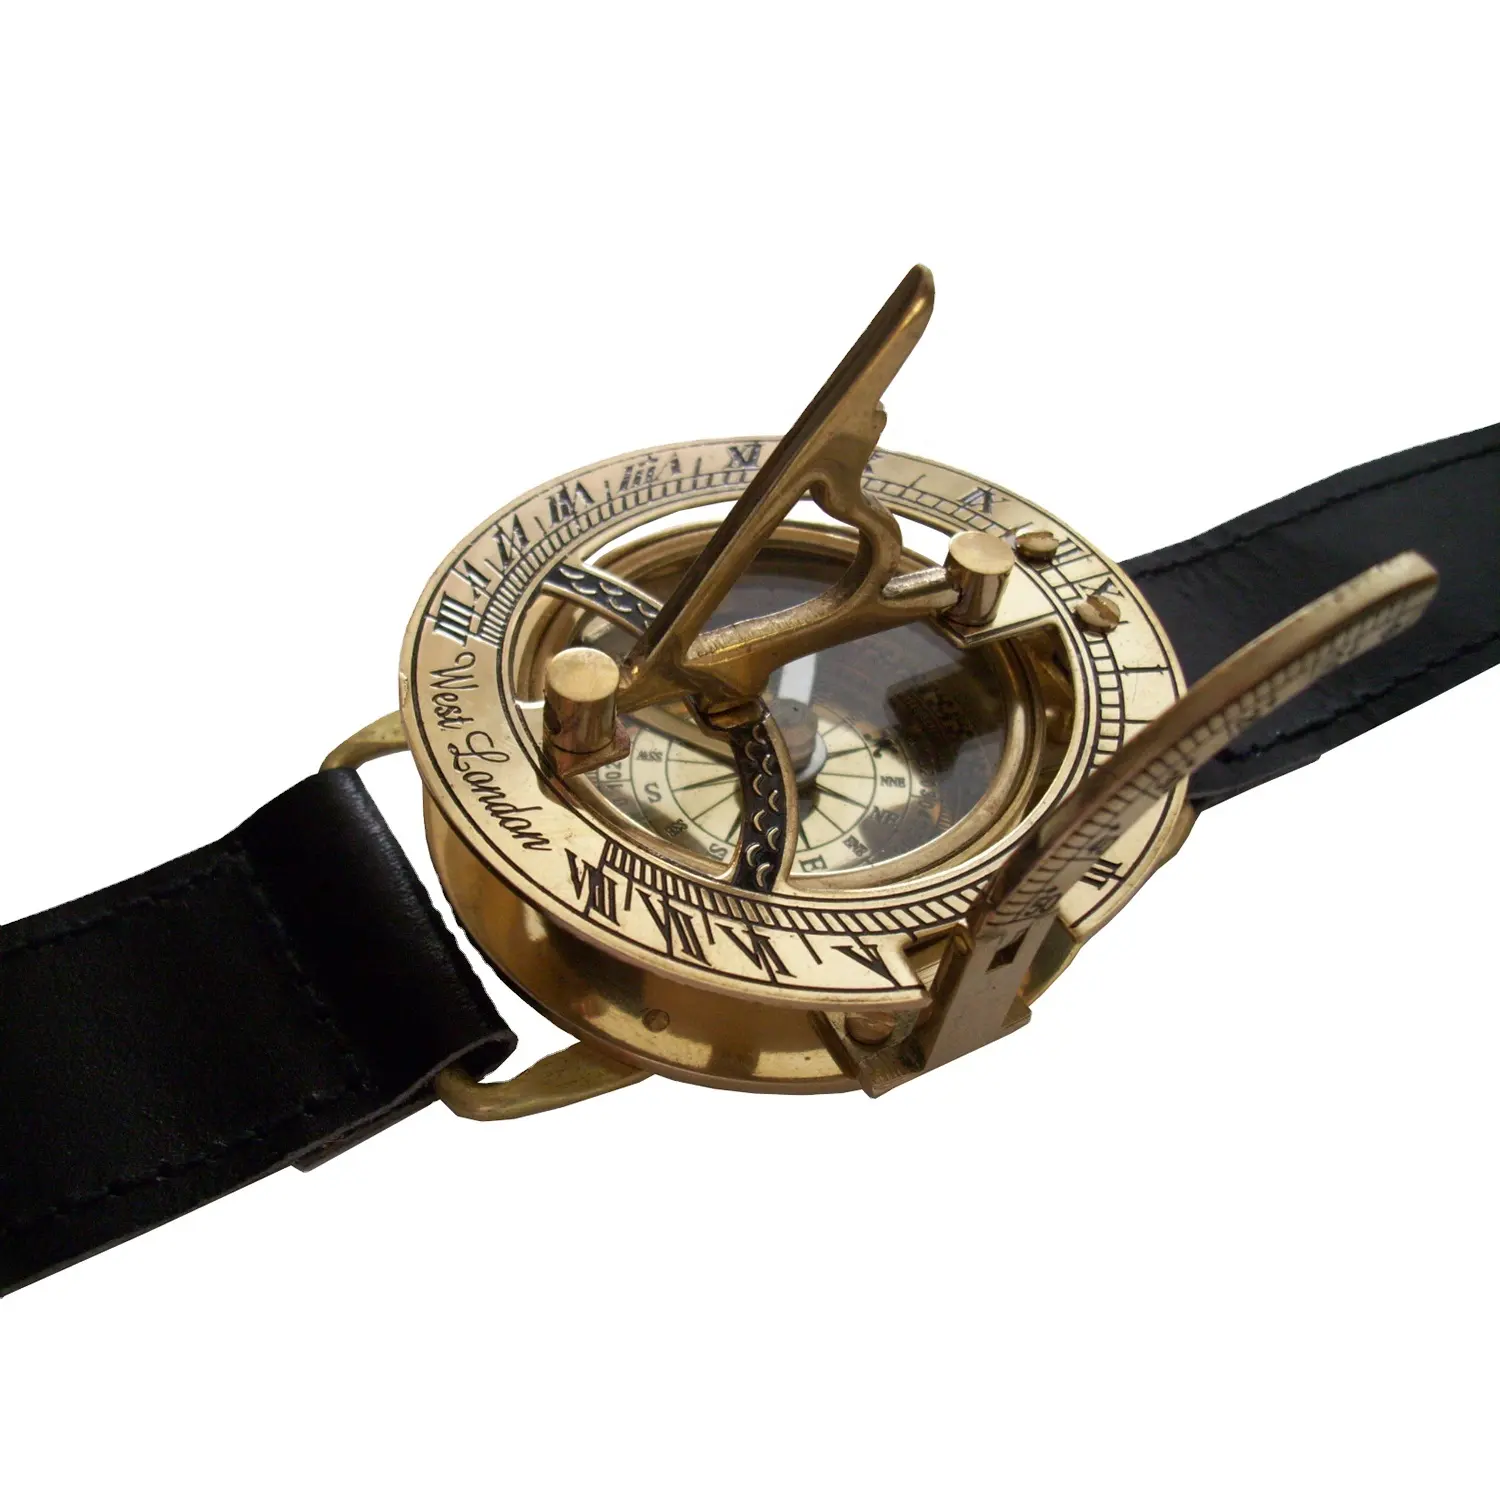 Antique Style Wrist Watch Sundial Compass Brass Nautical Vintage Design Compass For Hiking & Camping